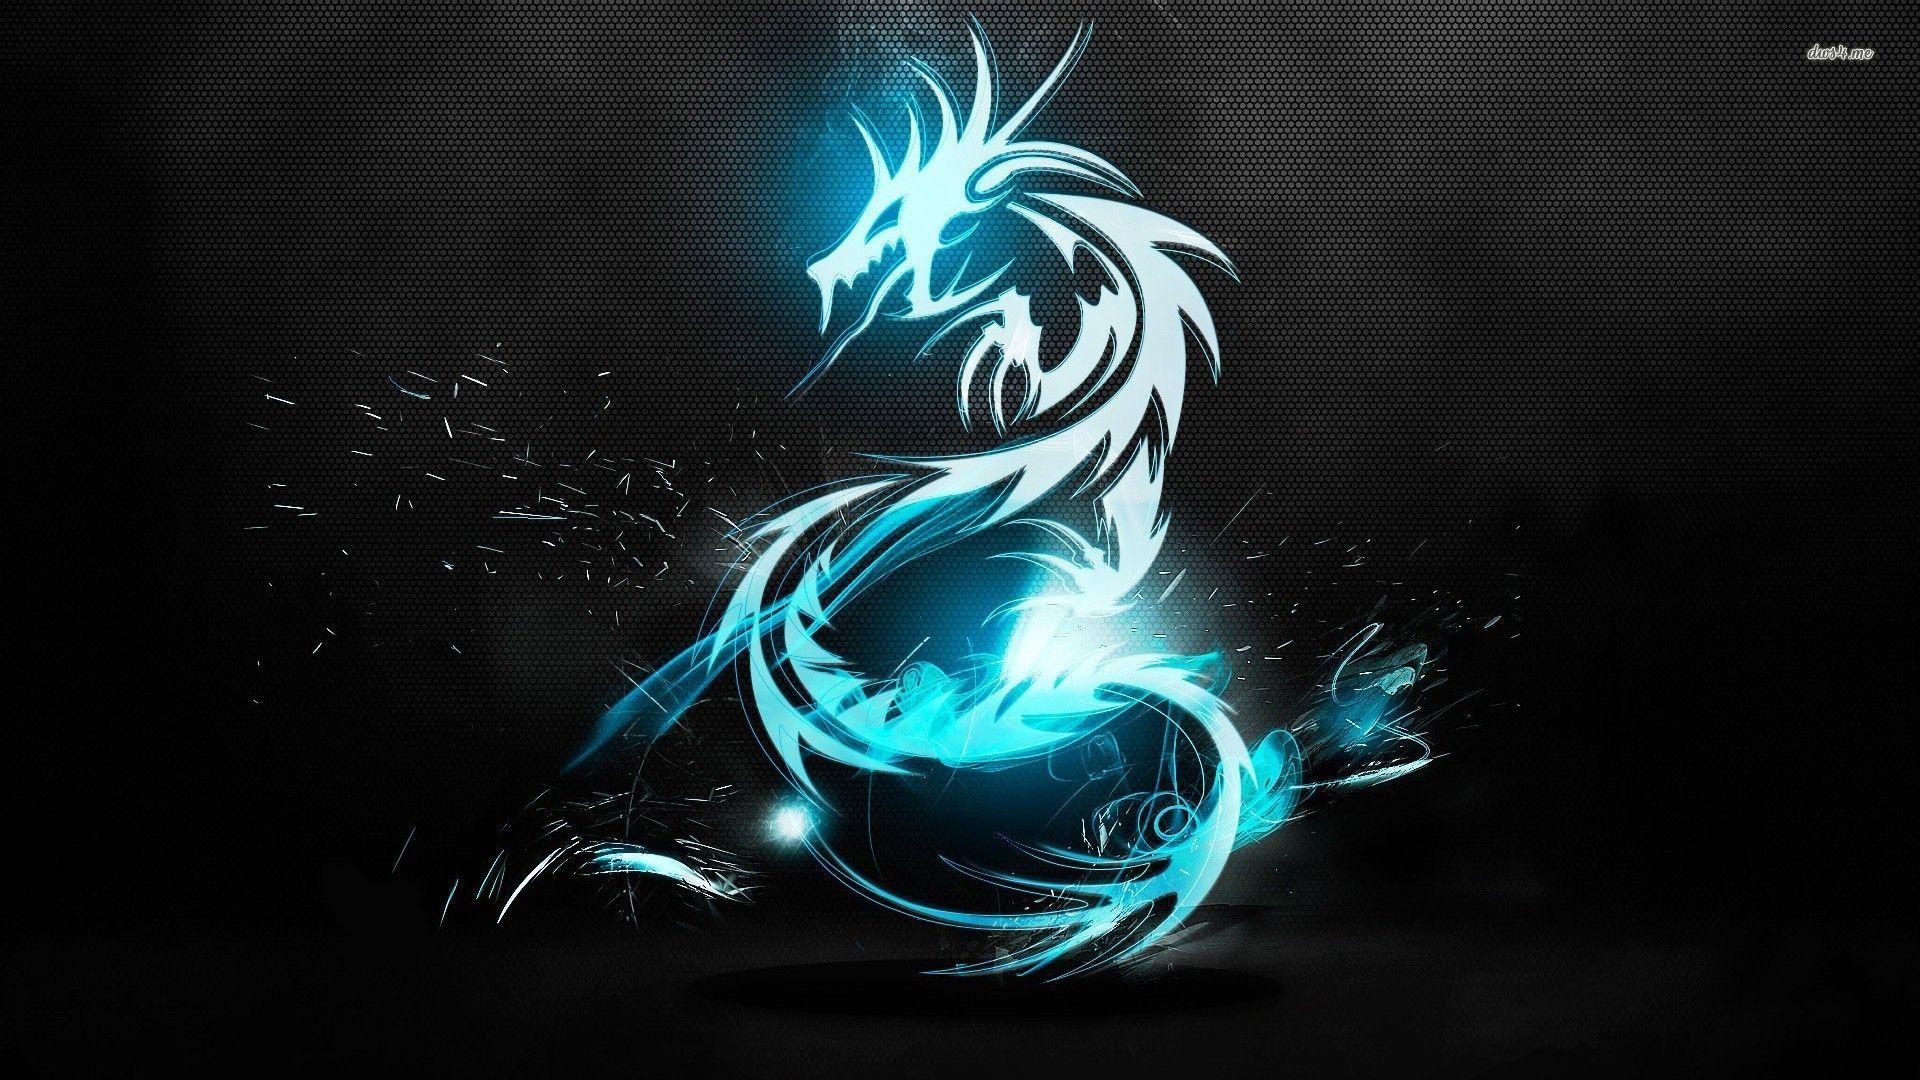 Dragon Art HD Picture Wallpaper with ID 2036 on Abstract category